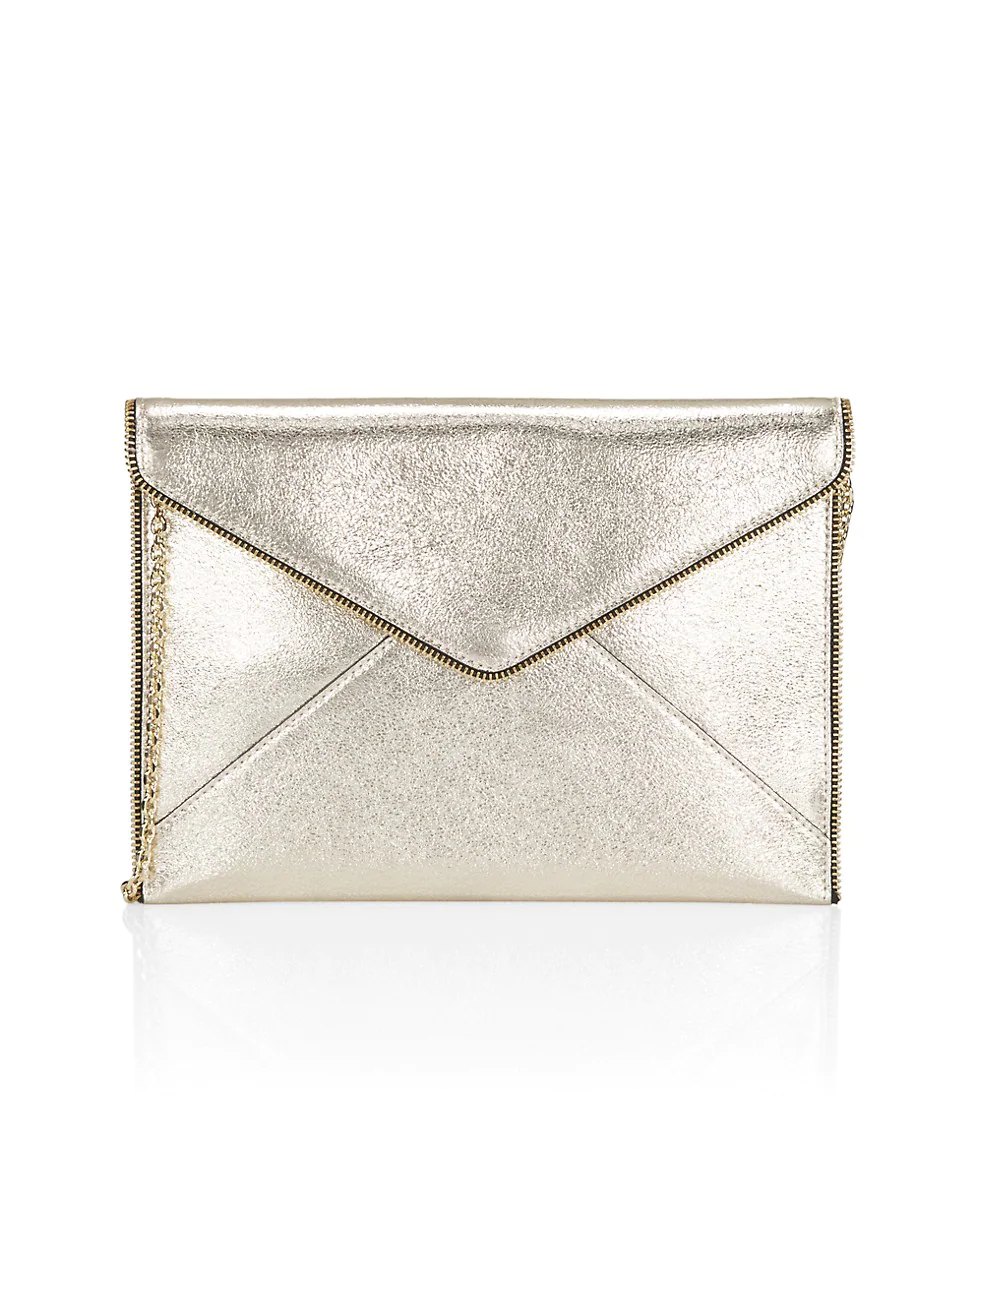 Dress to Impress With the 11 Best Designer Clutches